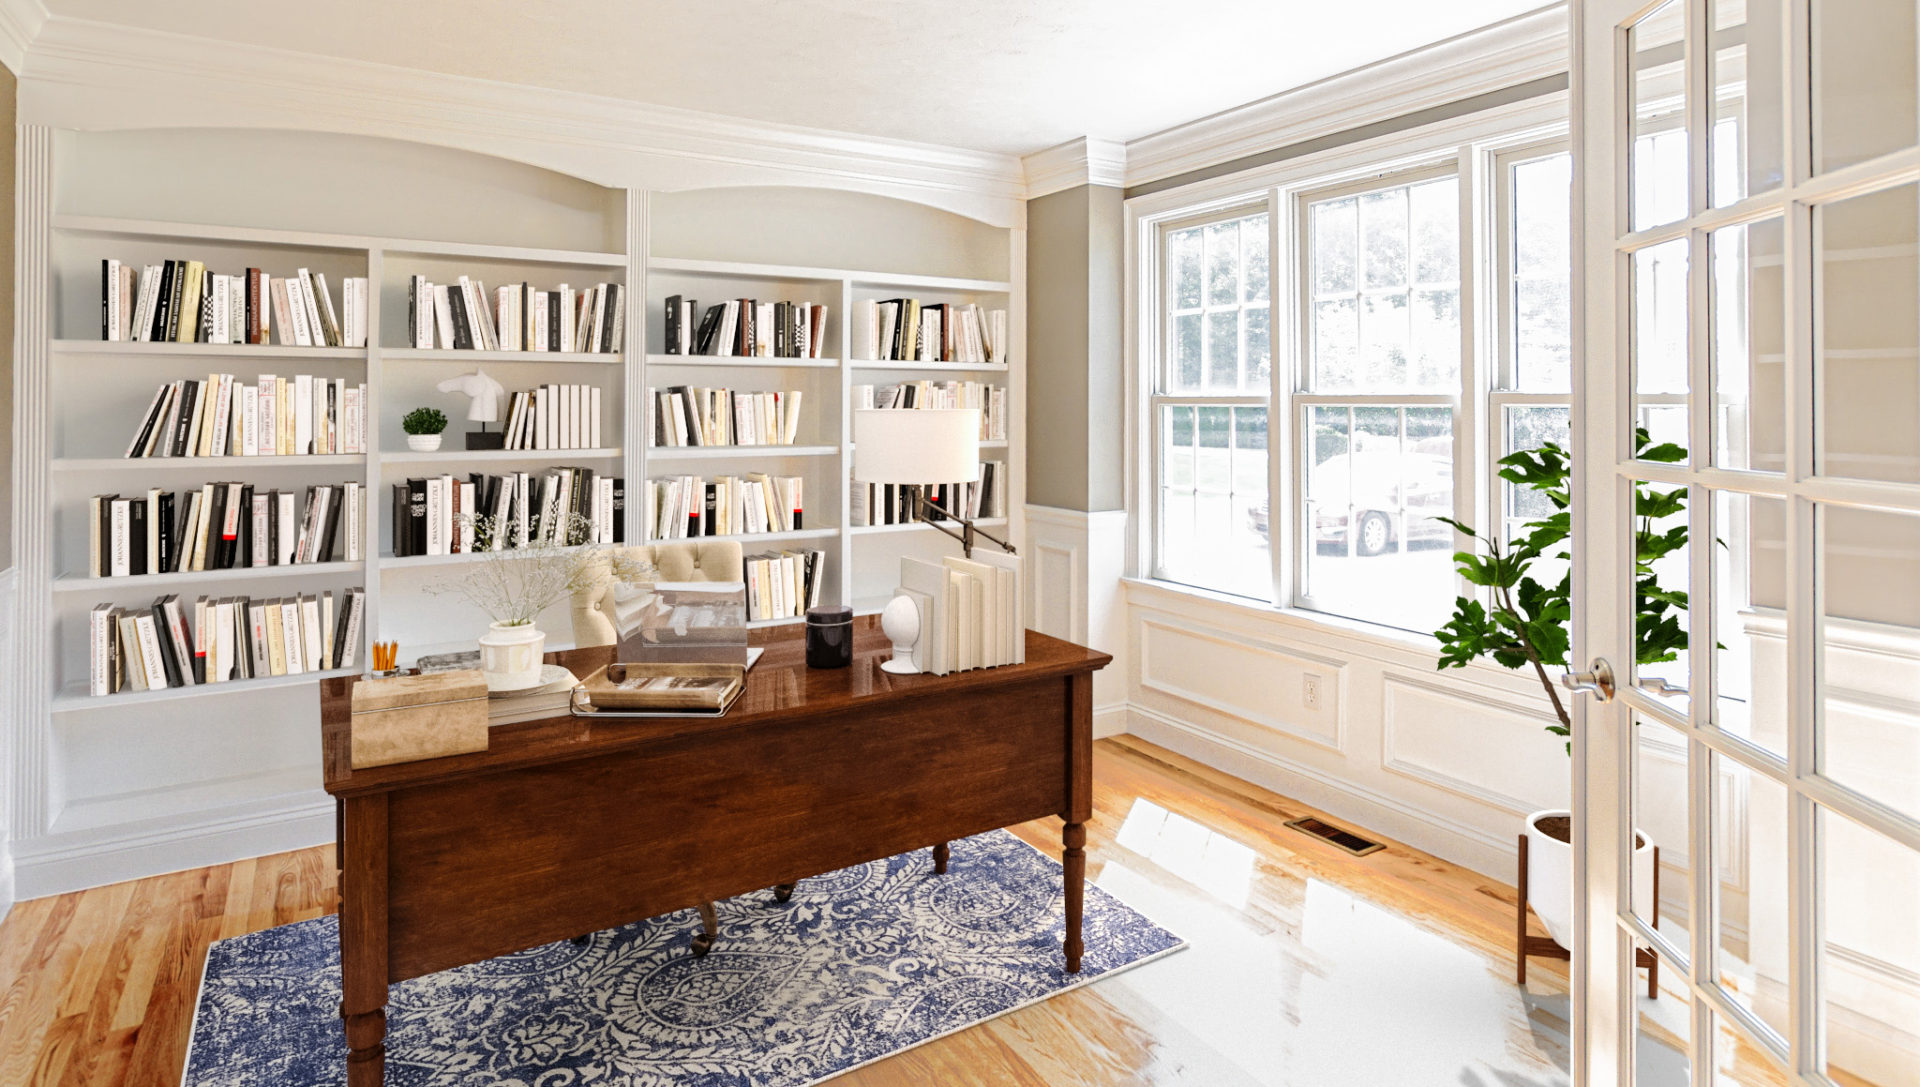 Virtually Staged Home Office Space in a 2-story colonial style home in Natick, MA.